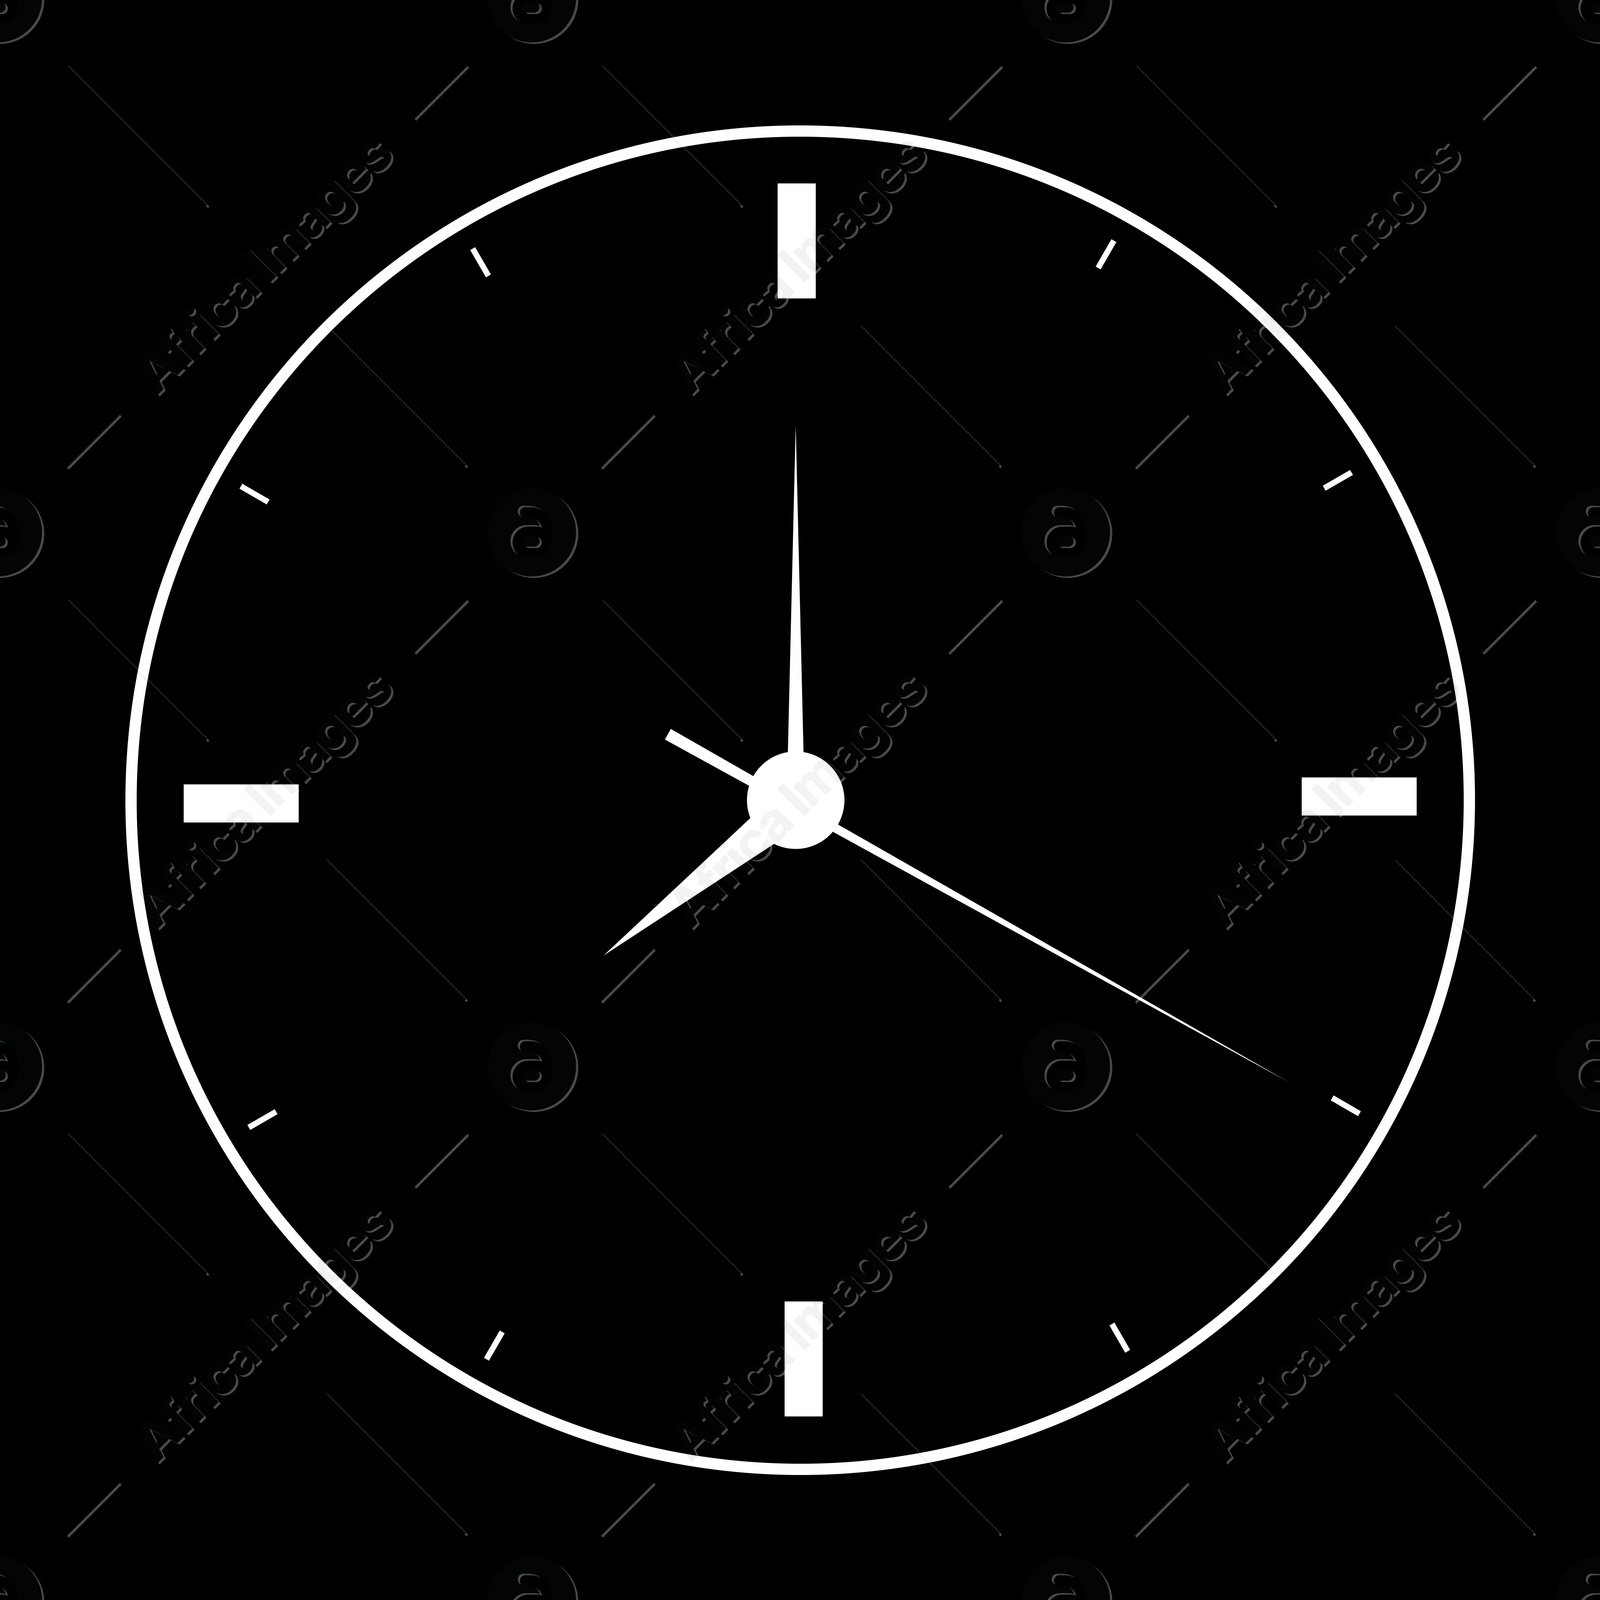 Image of Clock face with hands on black background